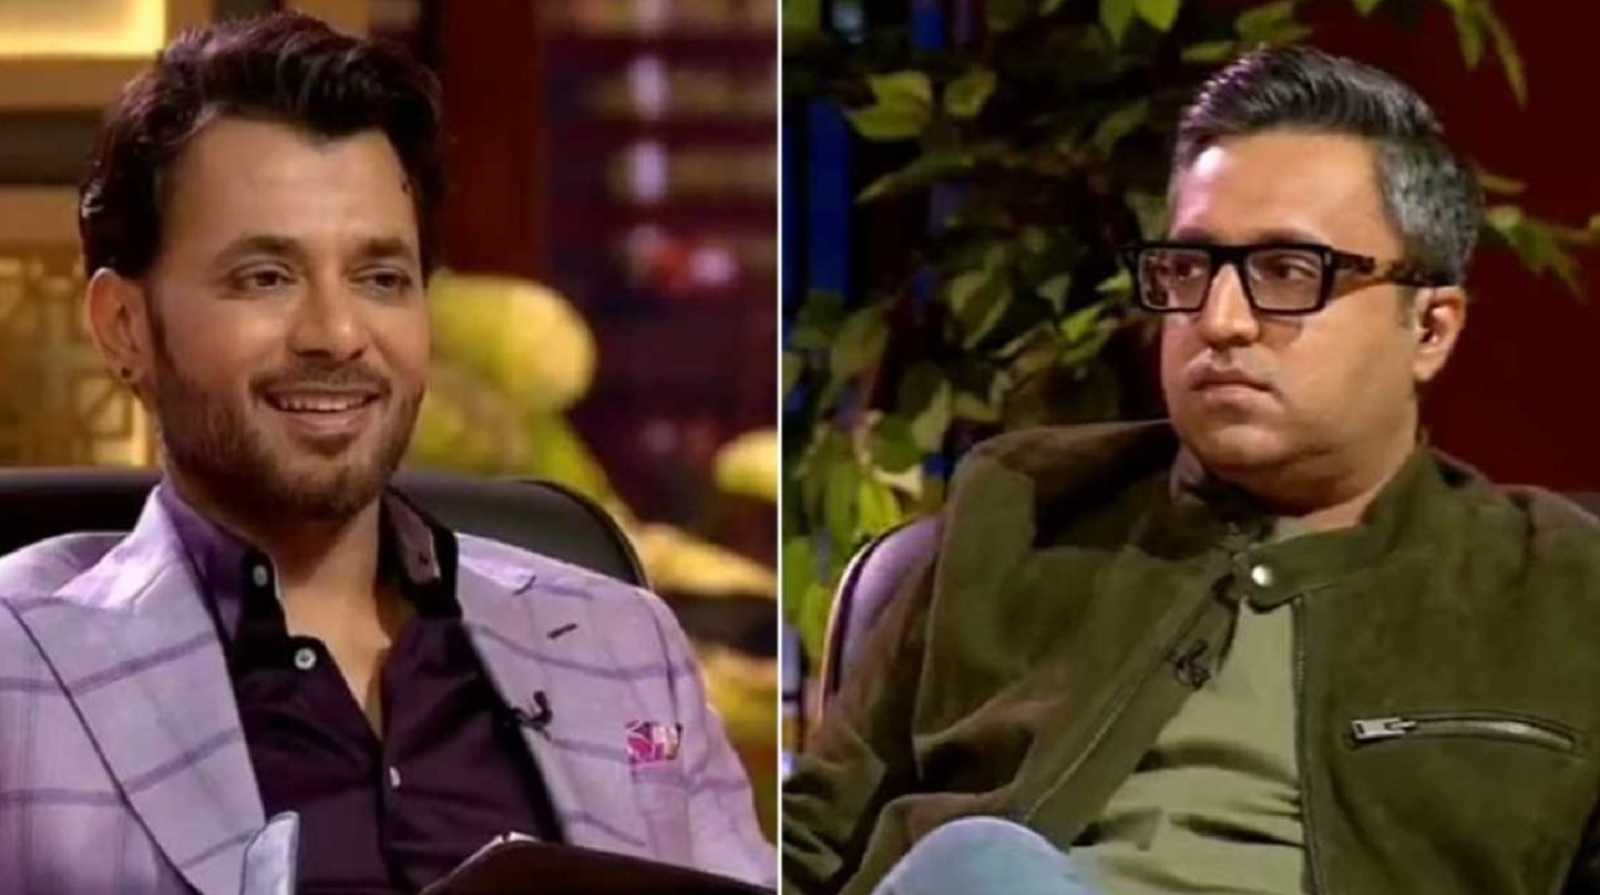 'Tatpunjiya is new Doglapan?': Shark Tank India 2's Anupam Mittal leaves co-sharks in surprise, netizens think he is trying to be Ashneer Grover